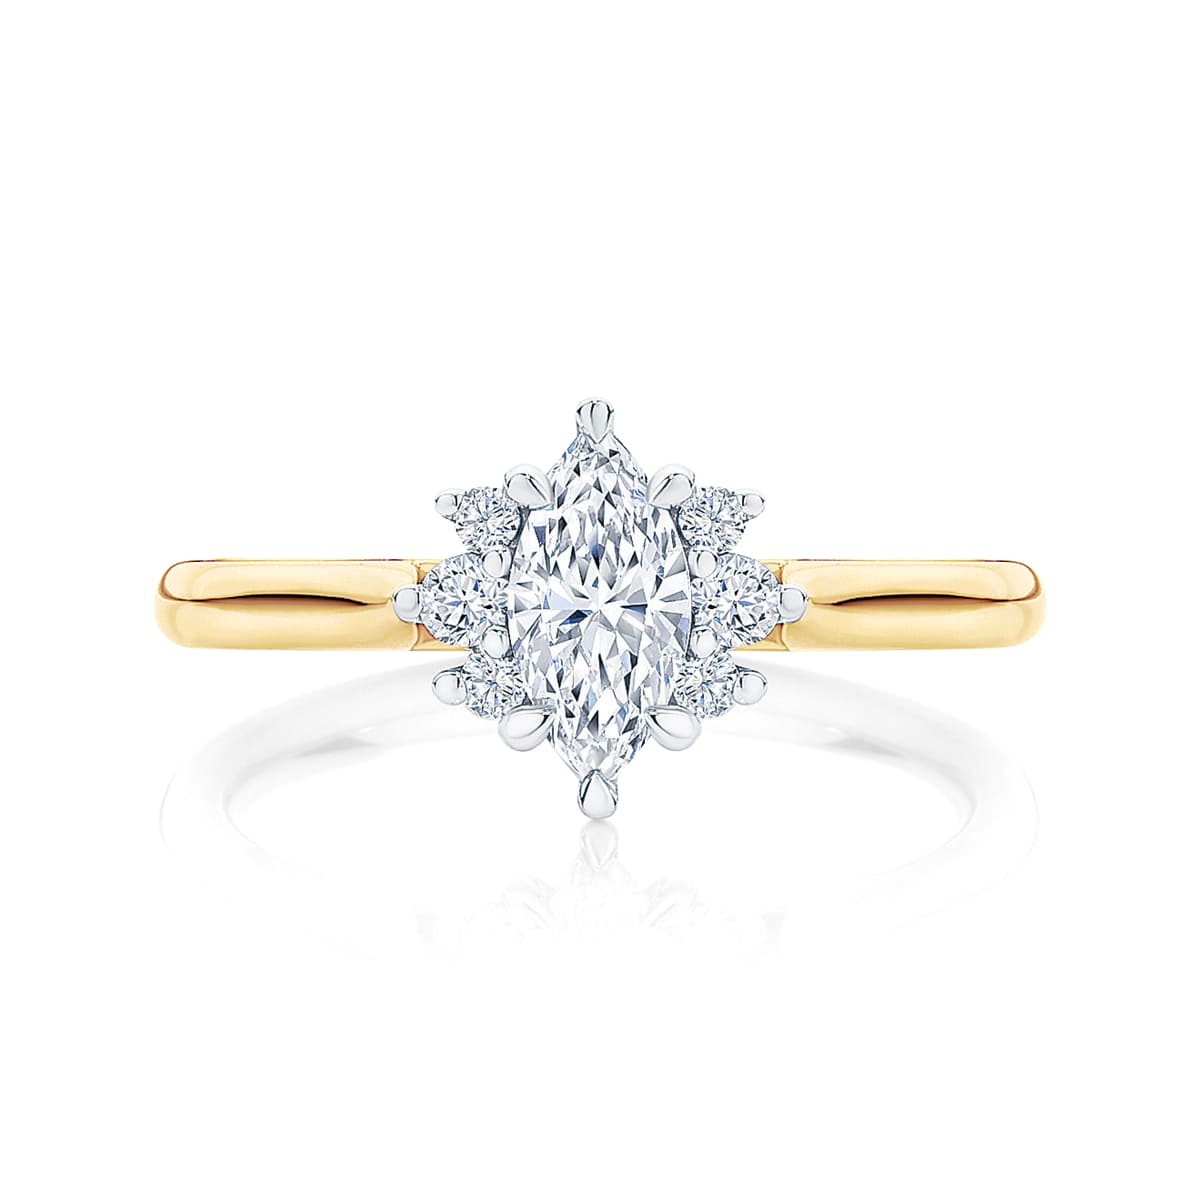 Cyra Marquise Diamond Yellow Gold Engagement Ring with Side Stones